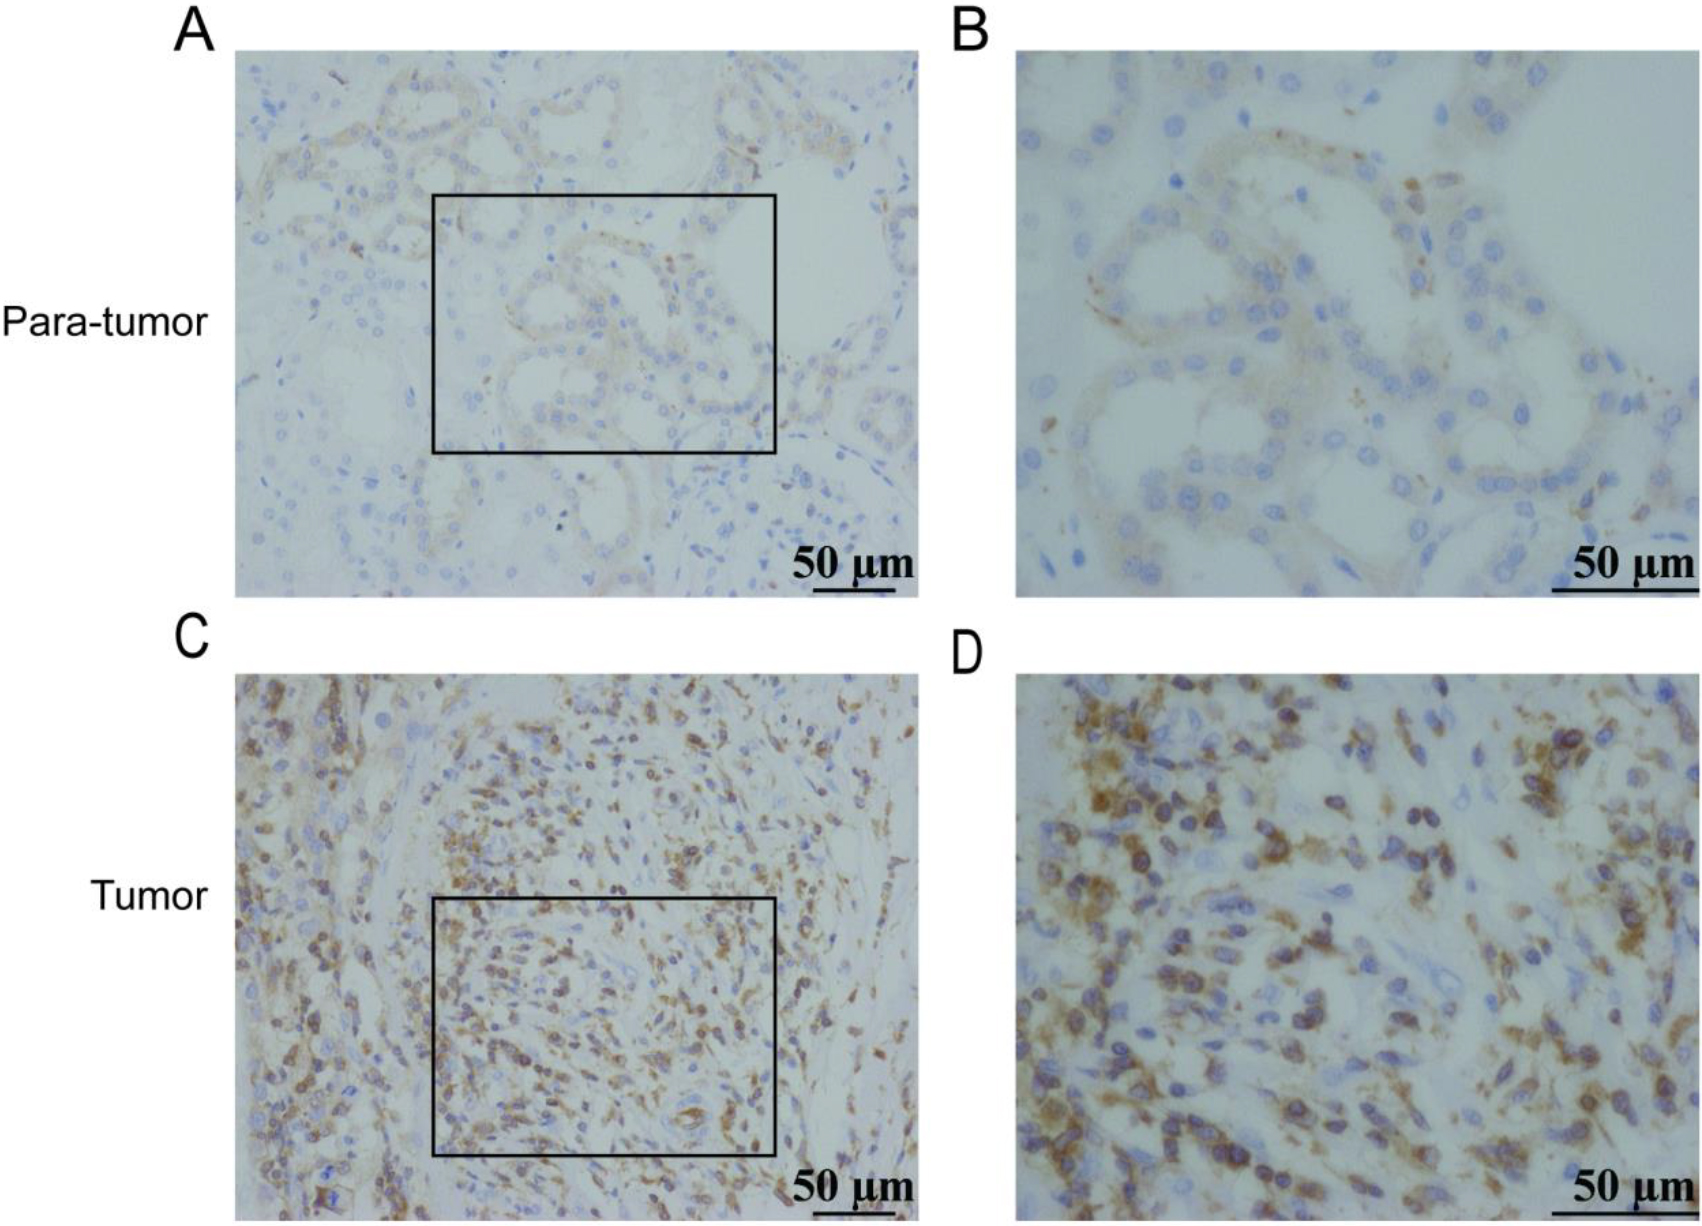 Expression of ARHGAP4 in KIRC tissues. Low expression of ARHGAP4 in para-carcinoma tissues of KIRC (A, B). High expression of ARHGAP4 in KIRC tissues (C, D).